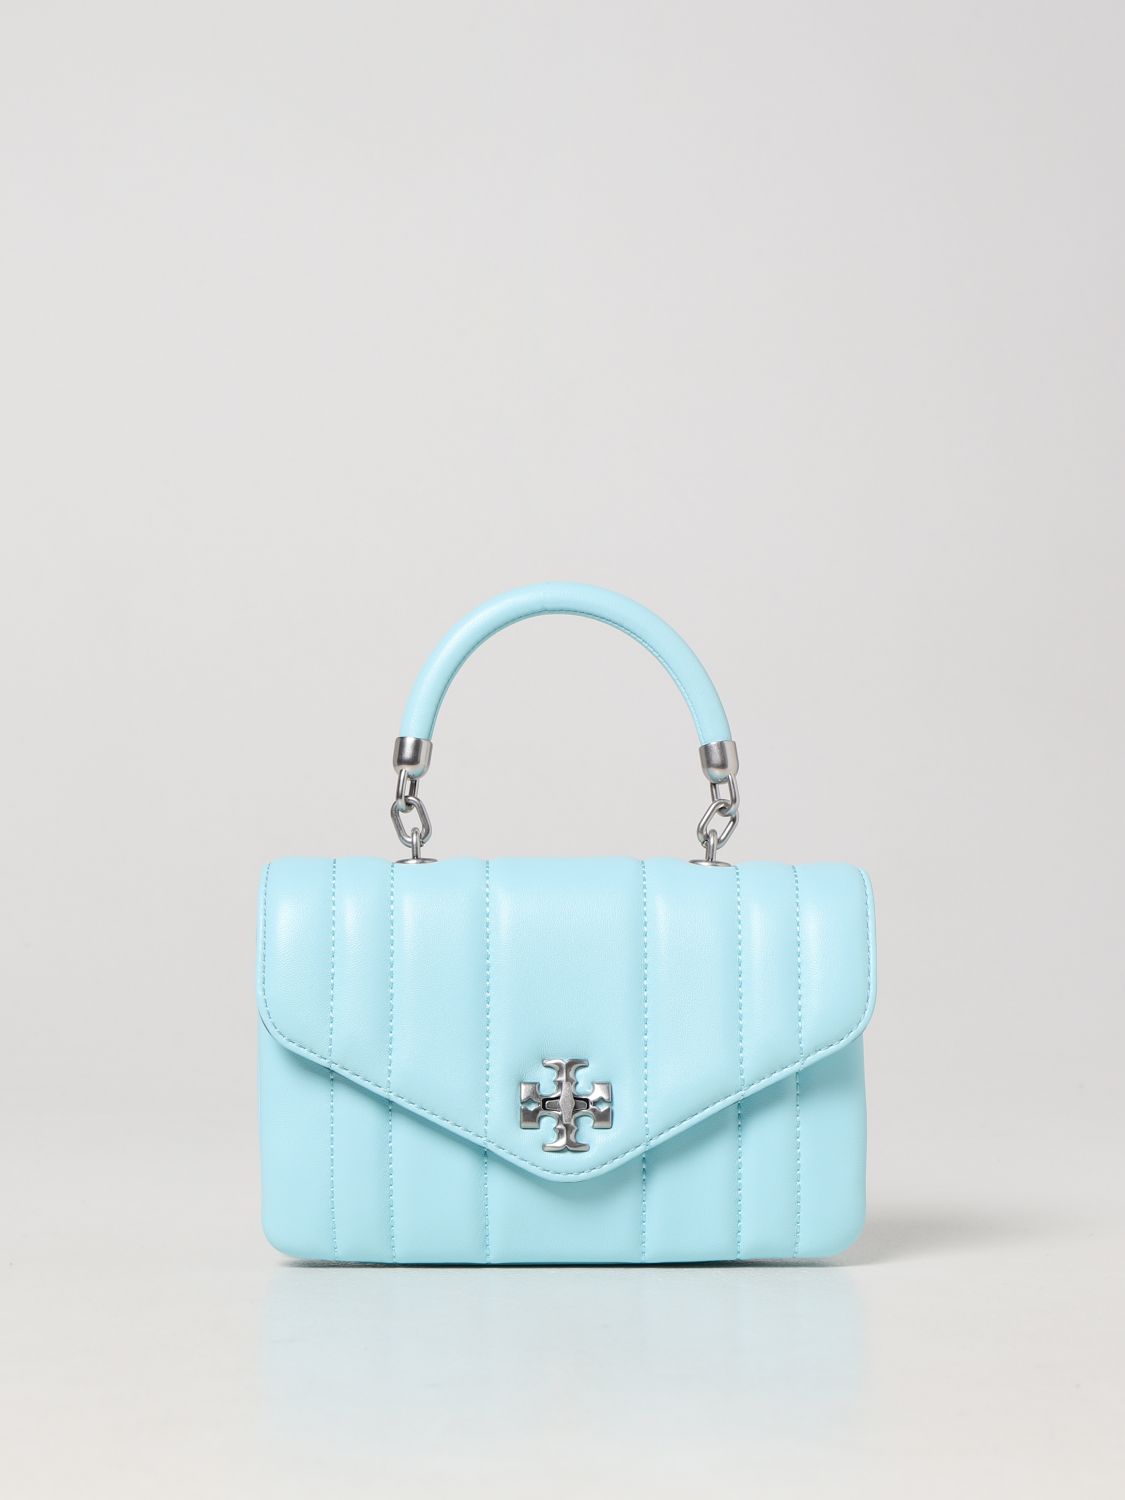 Tory Burch Perry Needlepoint Mini Bag in Blue